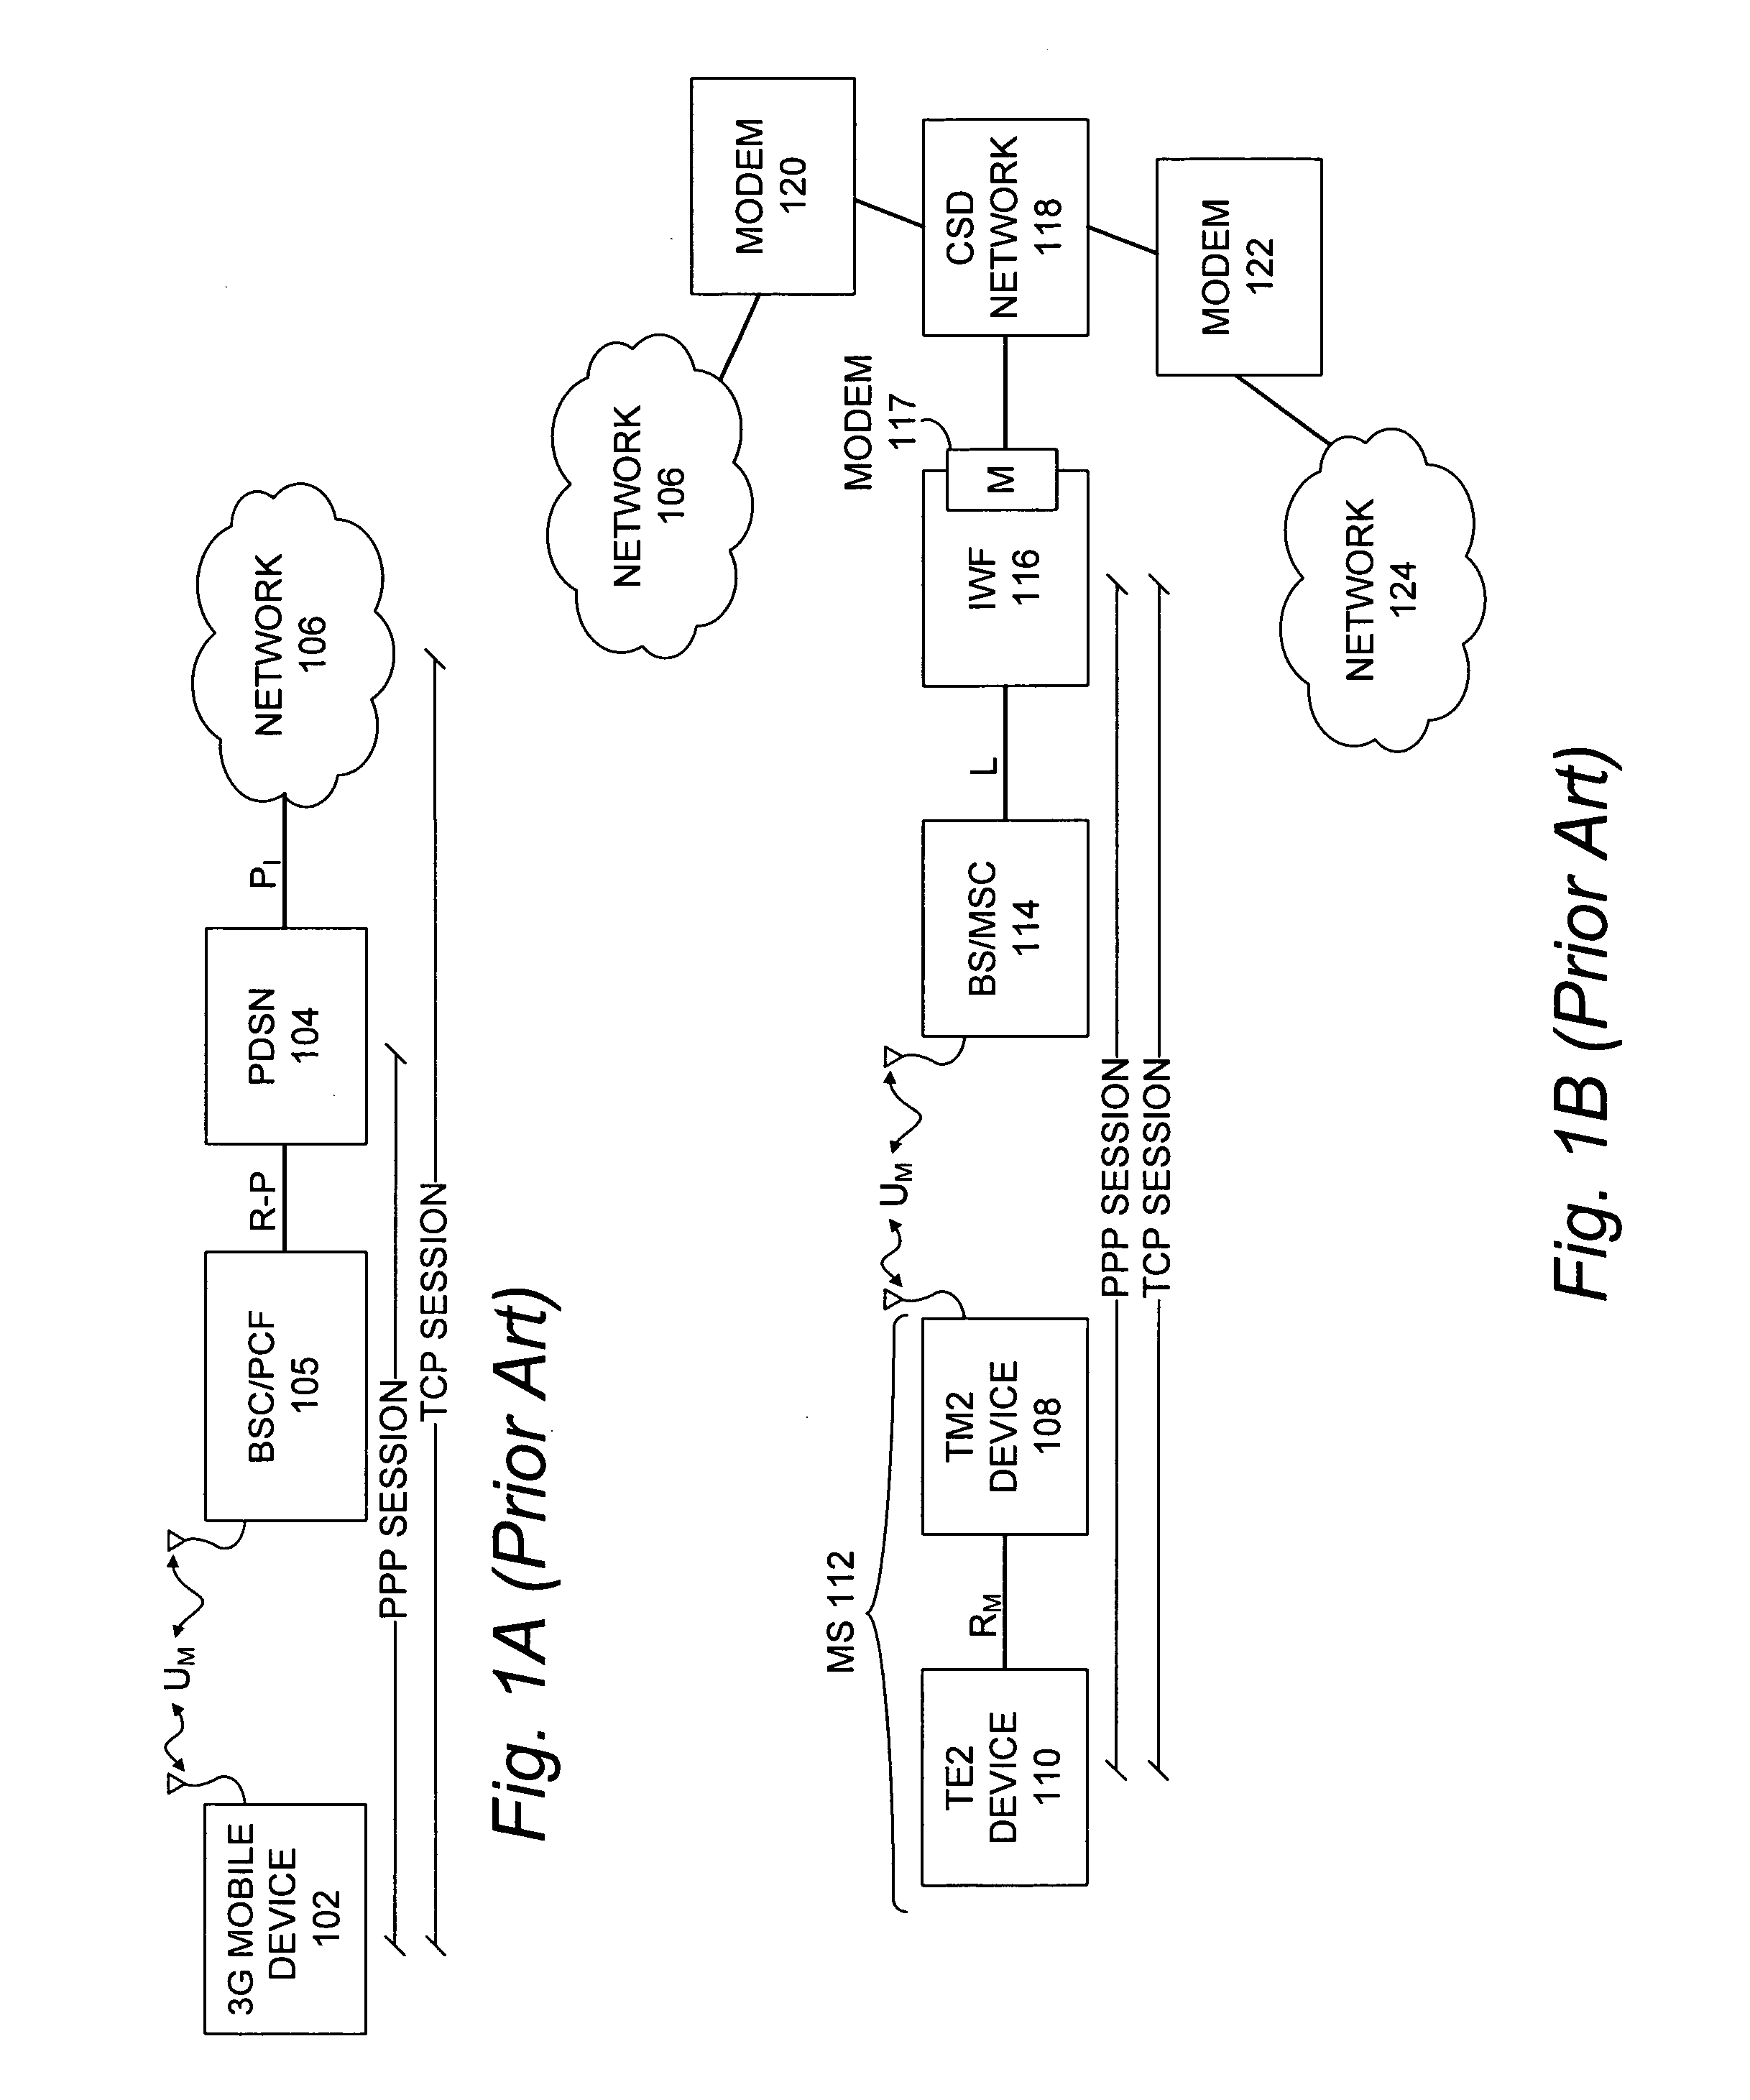 Method of establishing a PPP session over an air interface